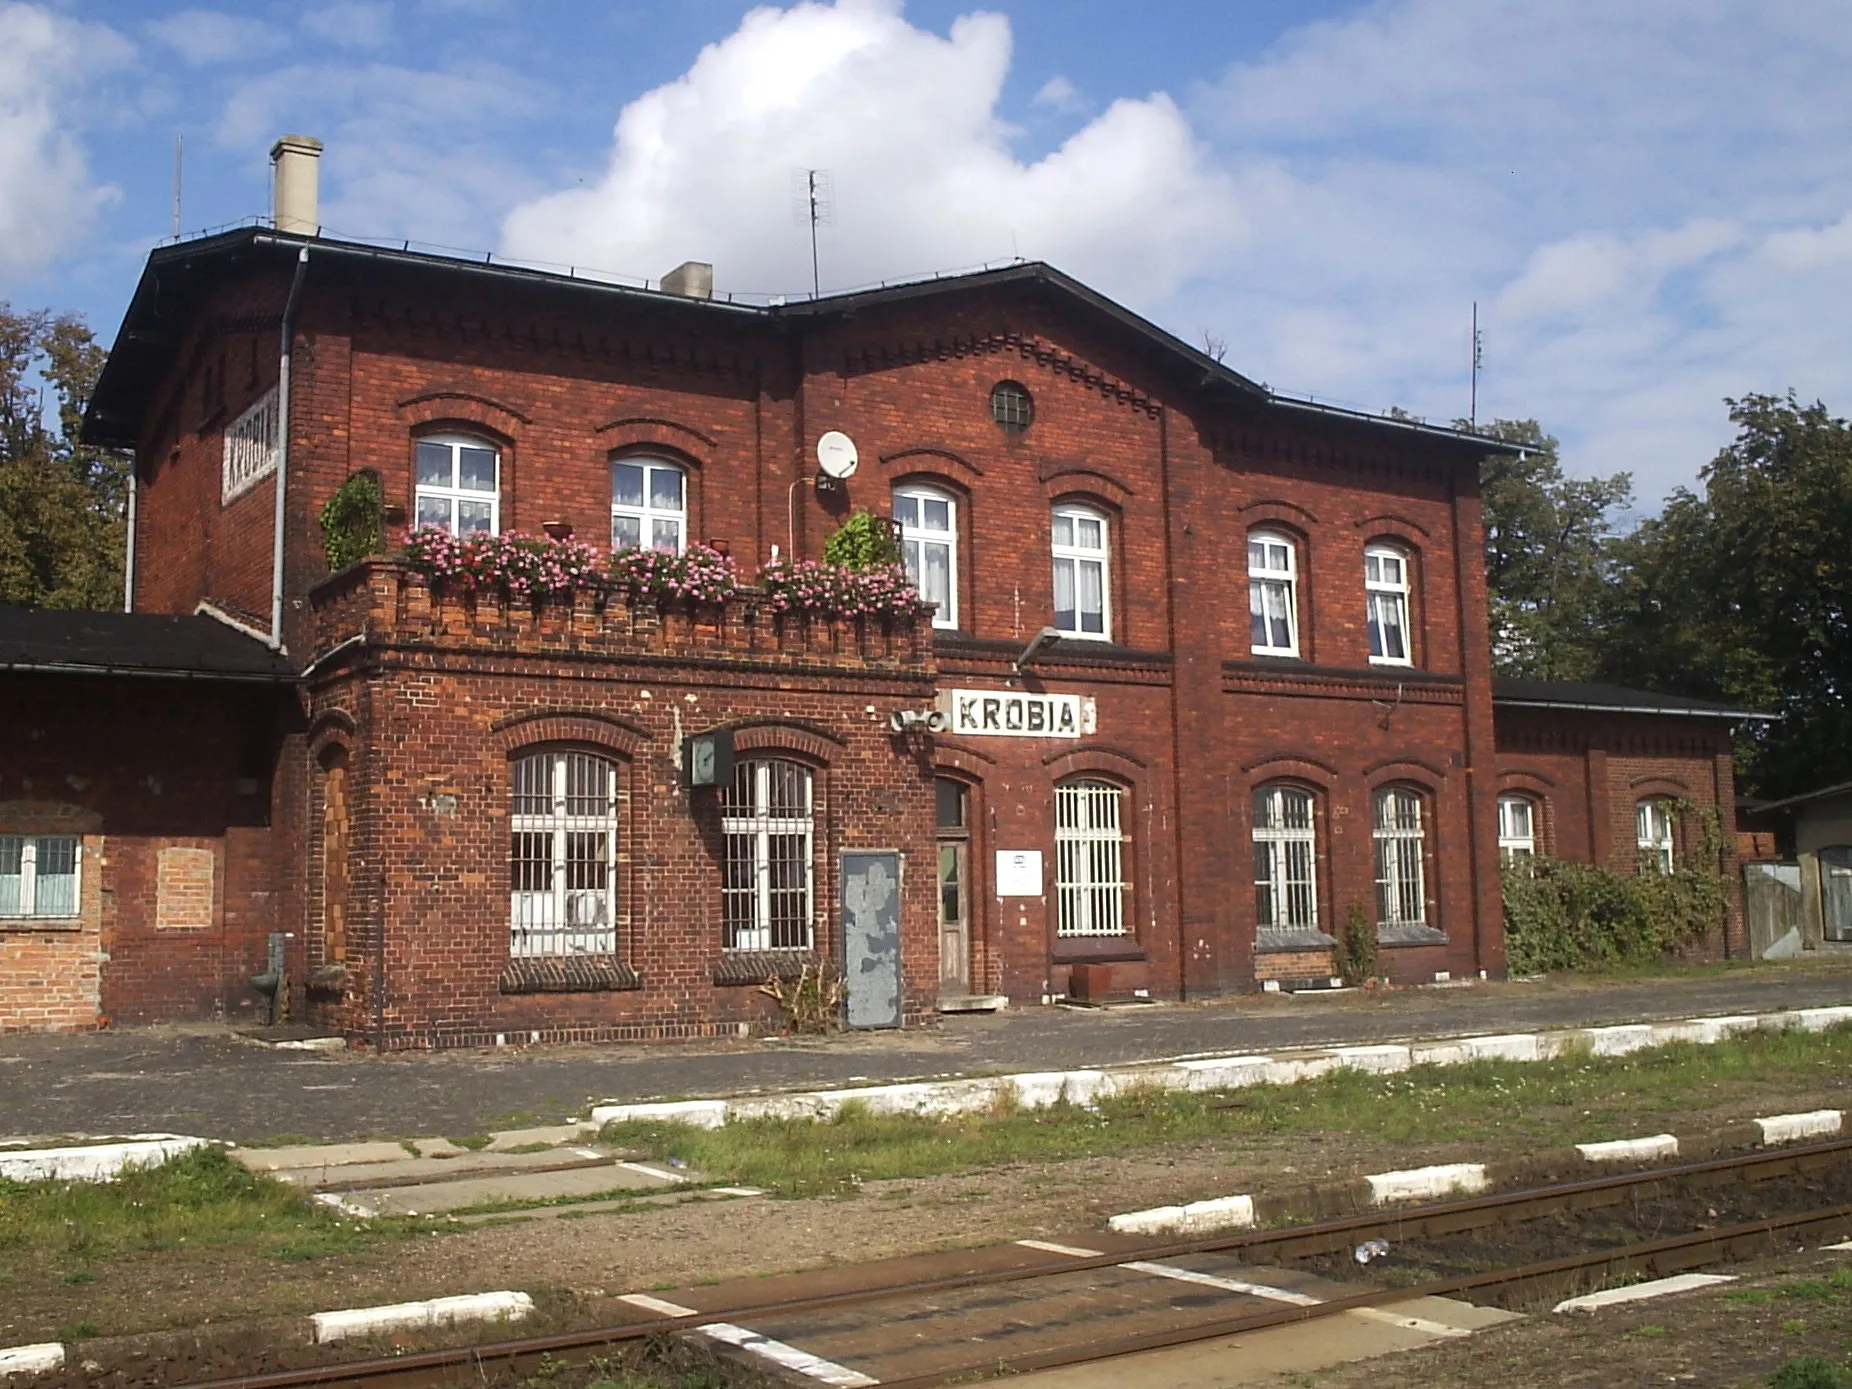 Photo showing: Train station in Kobia, Poland